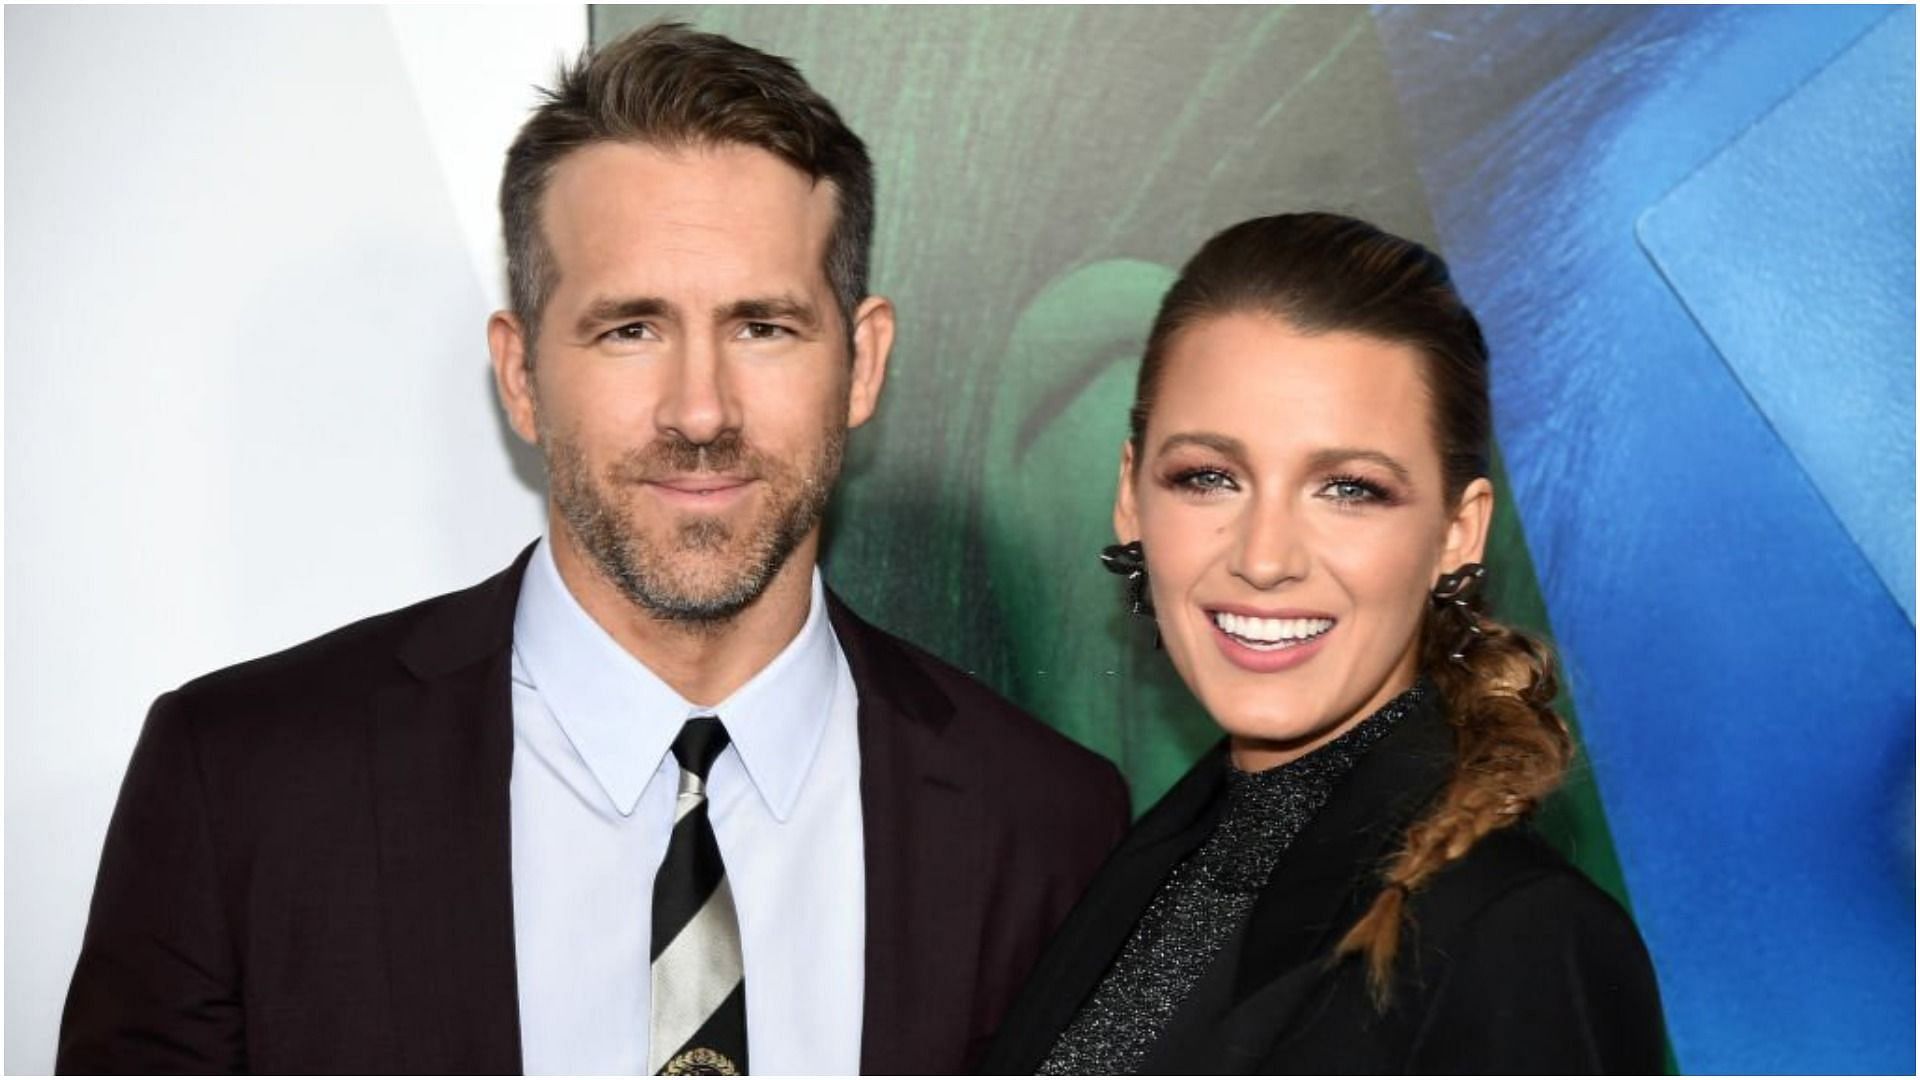 Ryan Reynolds and Blake Lively have donated for others in the past (Image via Steven Ferdman/Getty Images)